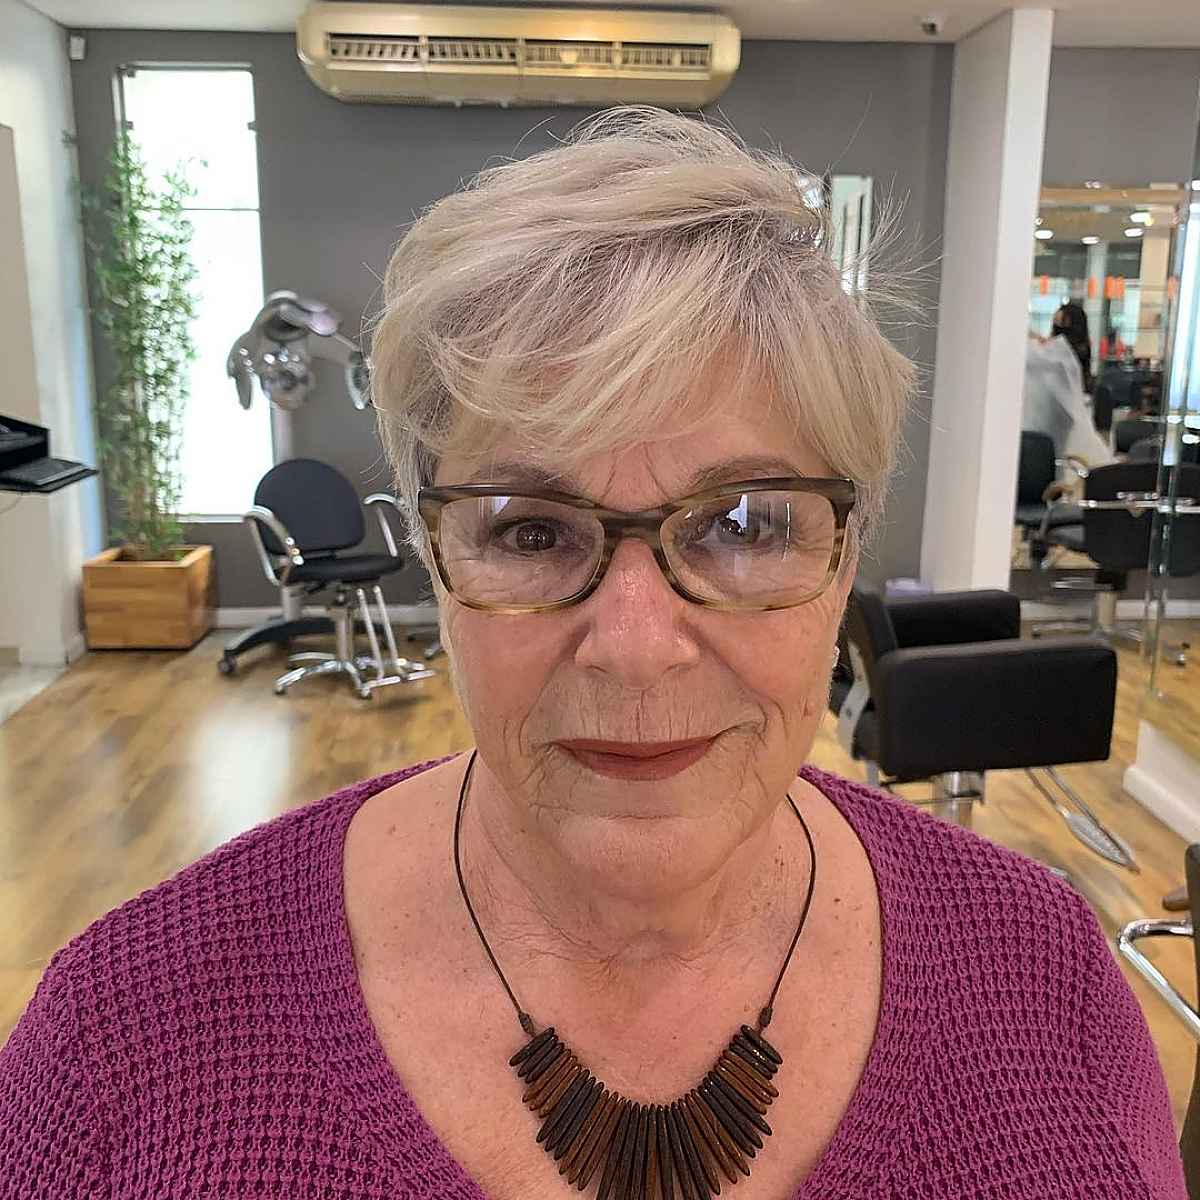 Silver Pixie Cut with Bangs and Glasses